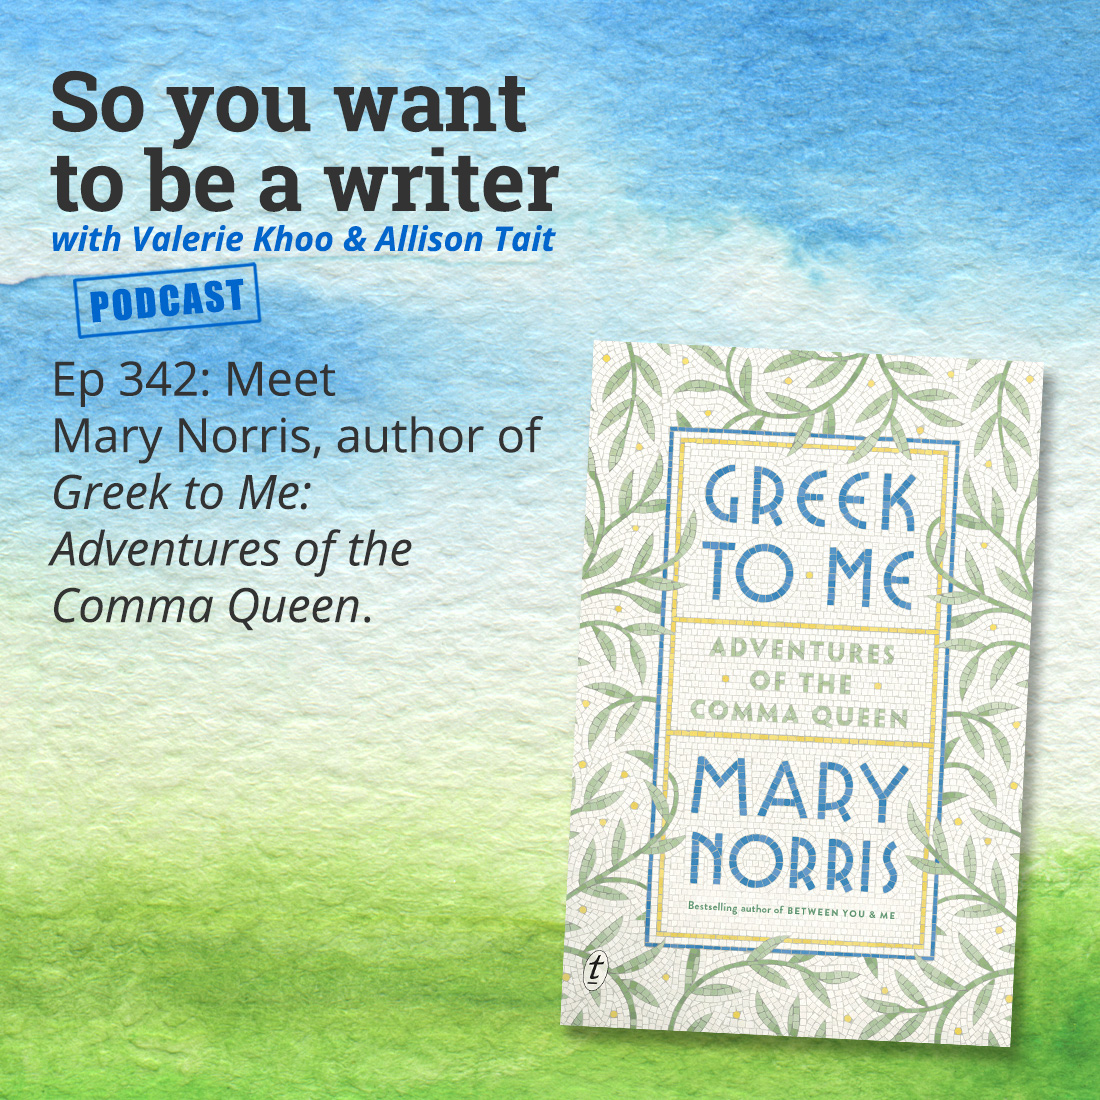 WRITER 342: Meet Mary Norris, author of 'Greek to Me: Adventures of the Comma Queen'.